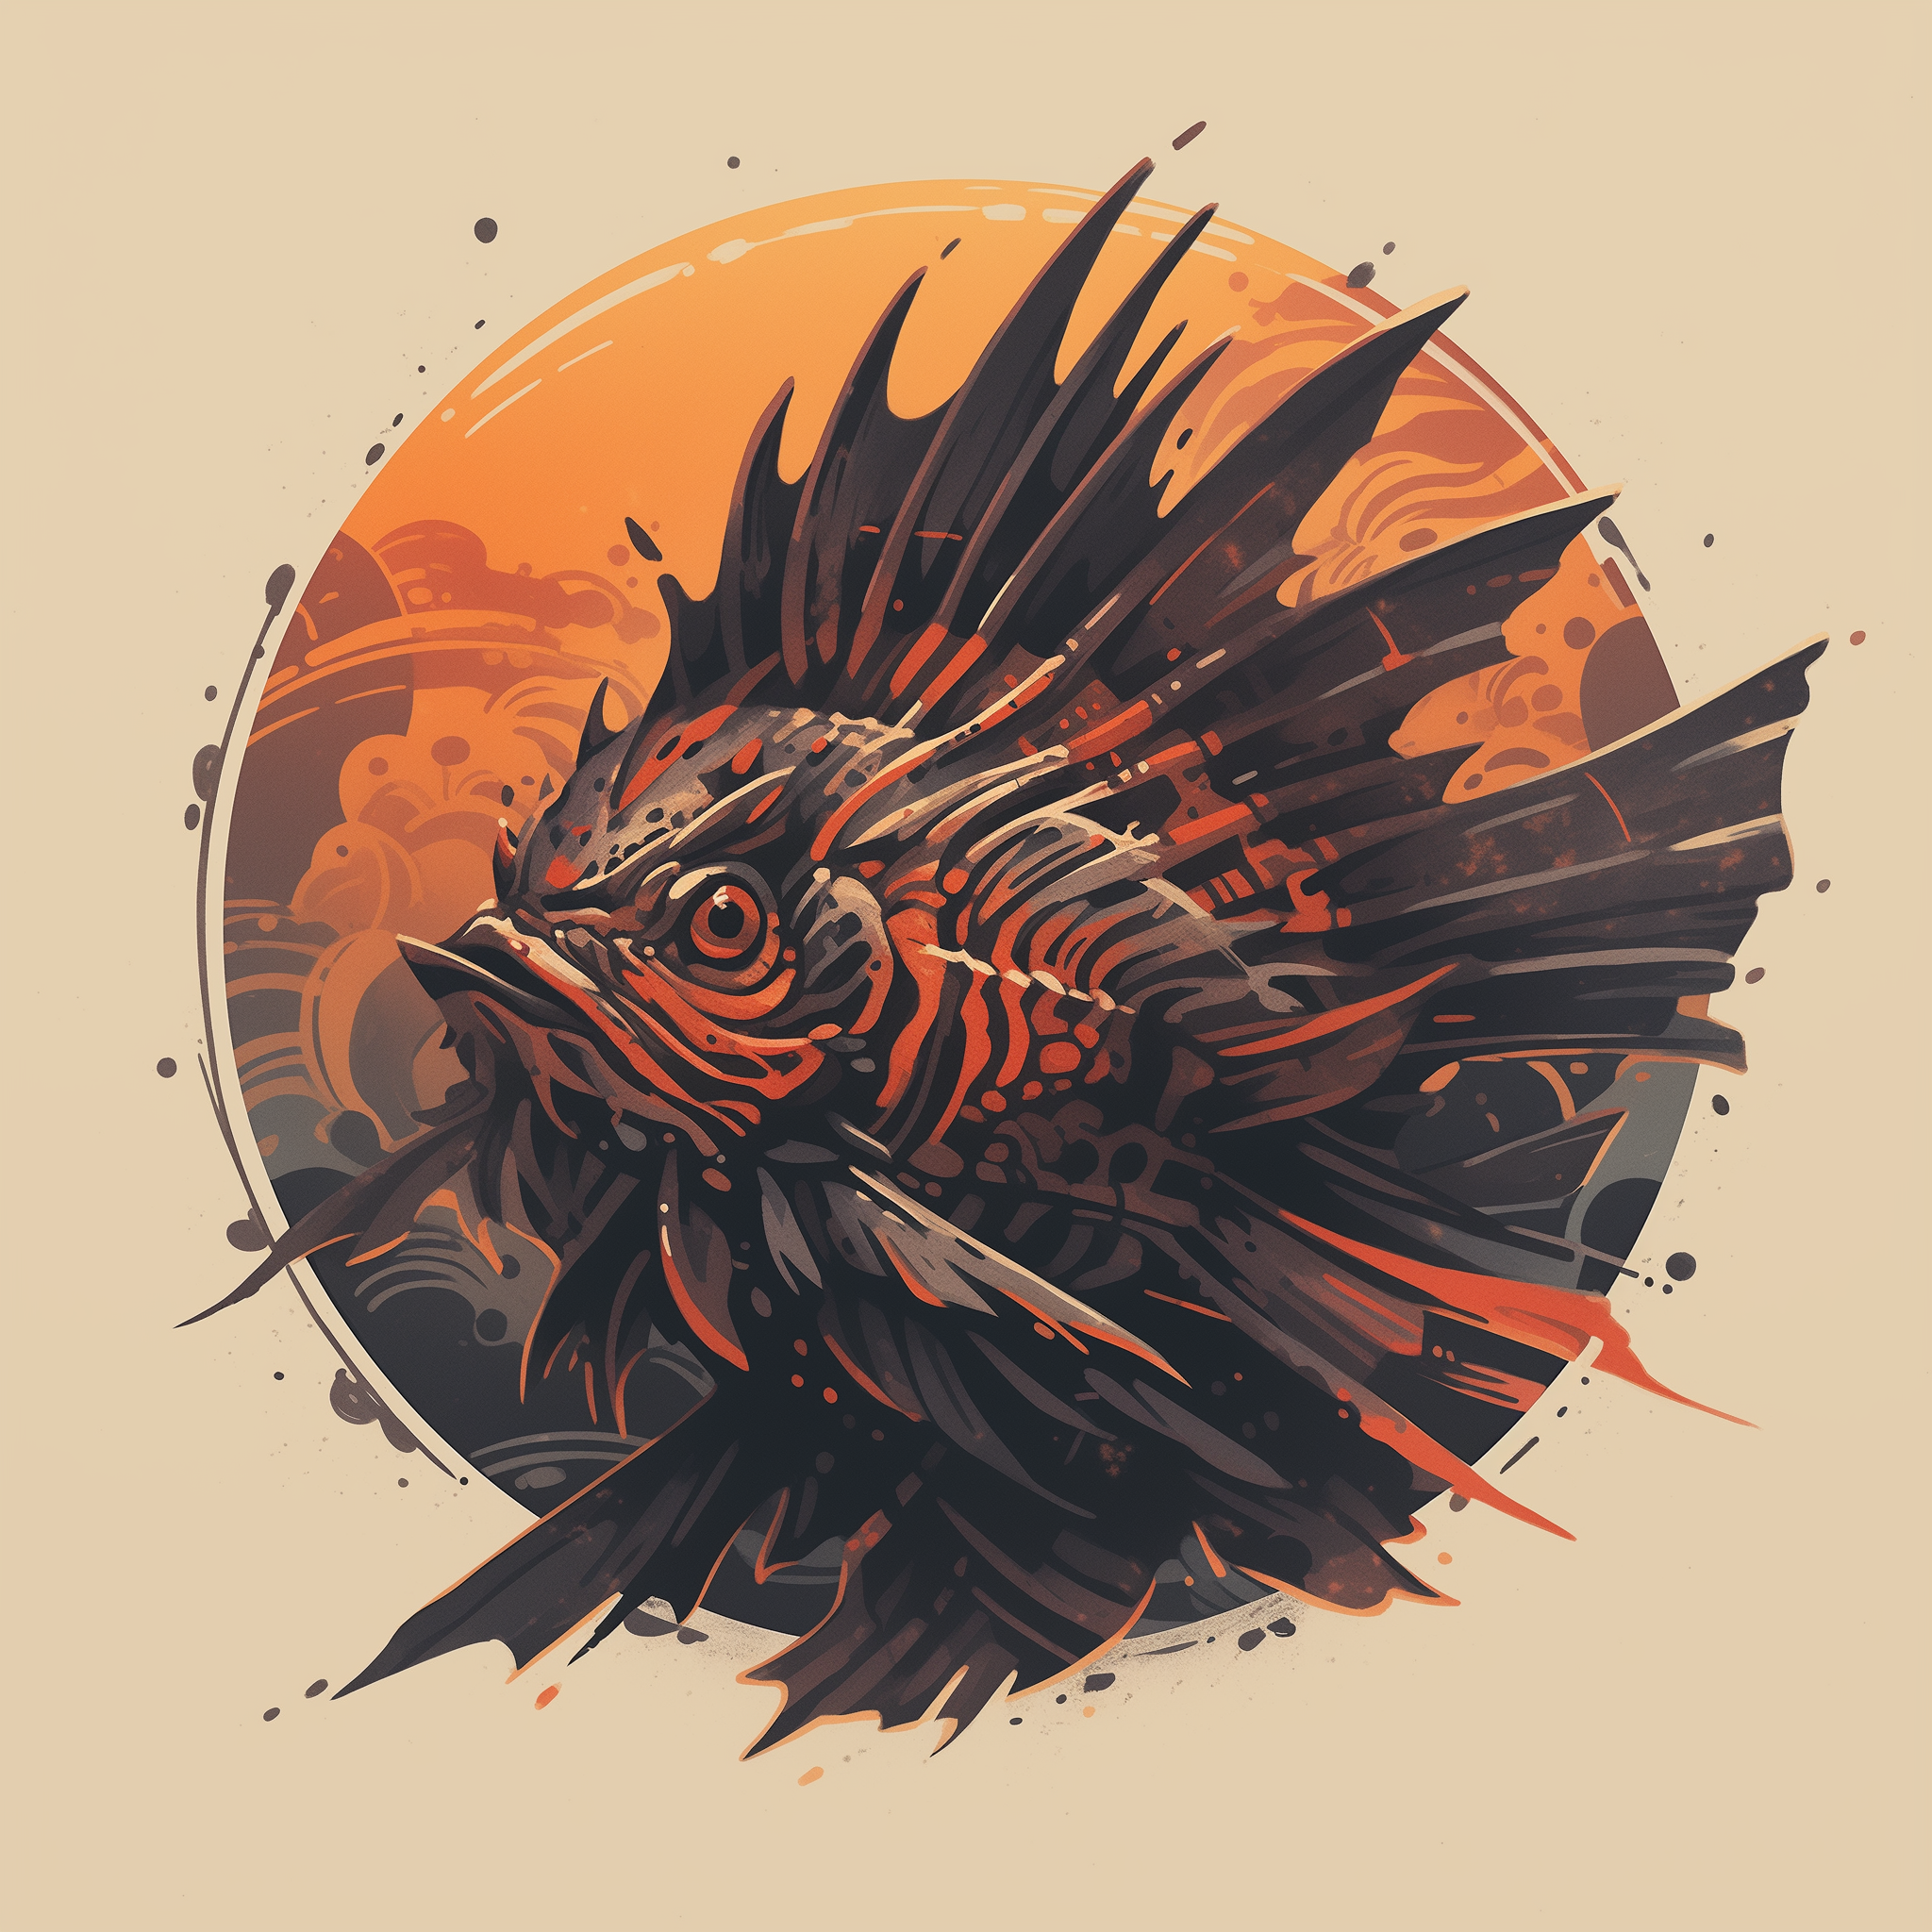 Stylized lionfish avatar with intricate orange and black patterns, perfect for use as a profile picture or pfp.